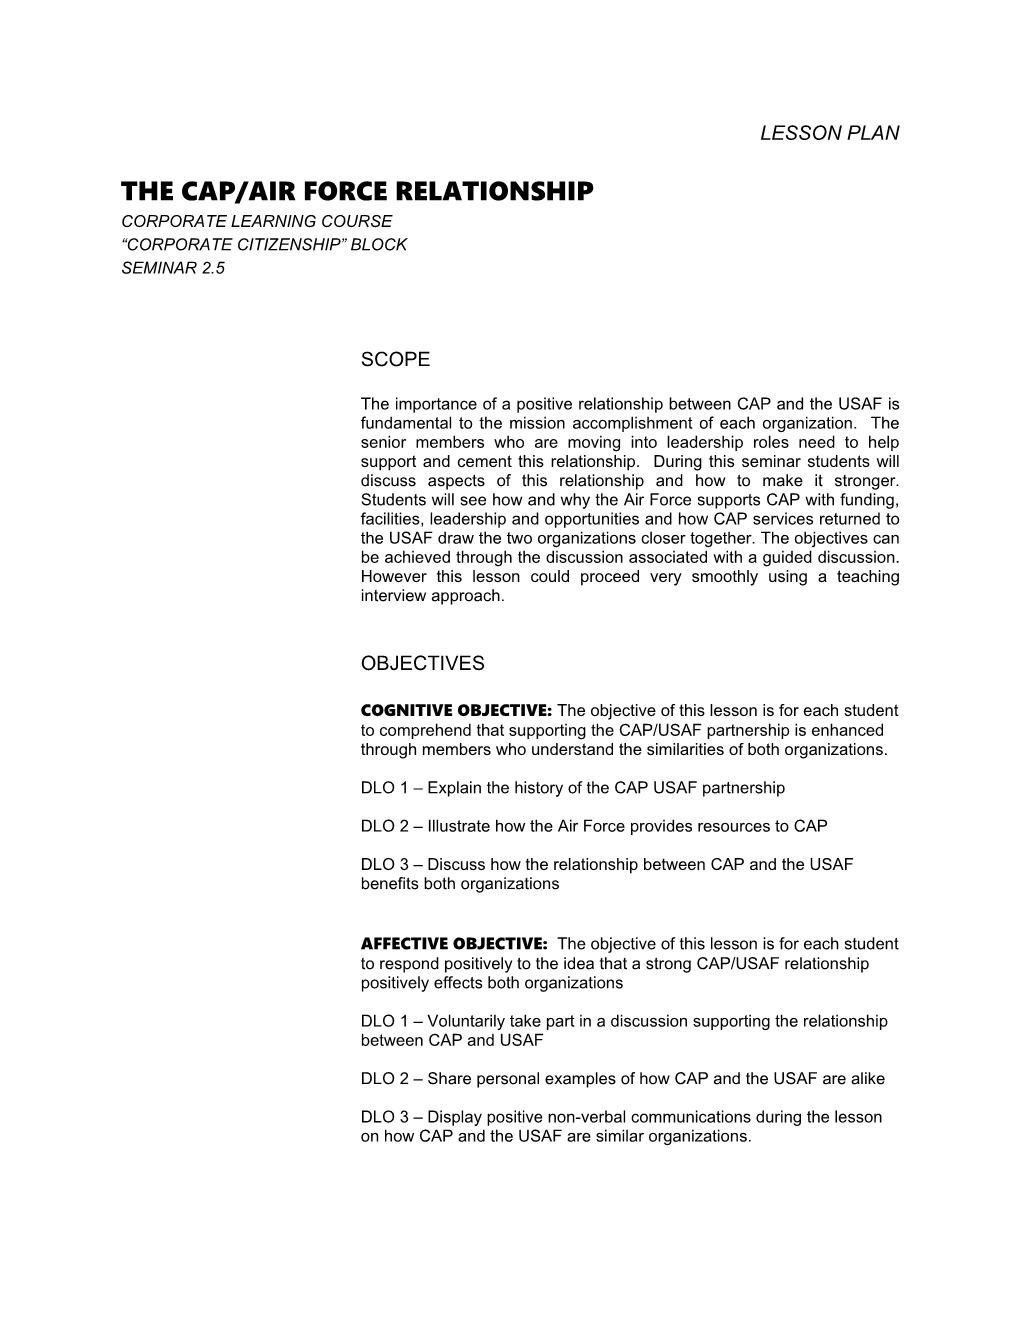 The Cap/Air Force Relationship